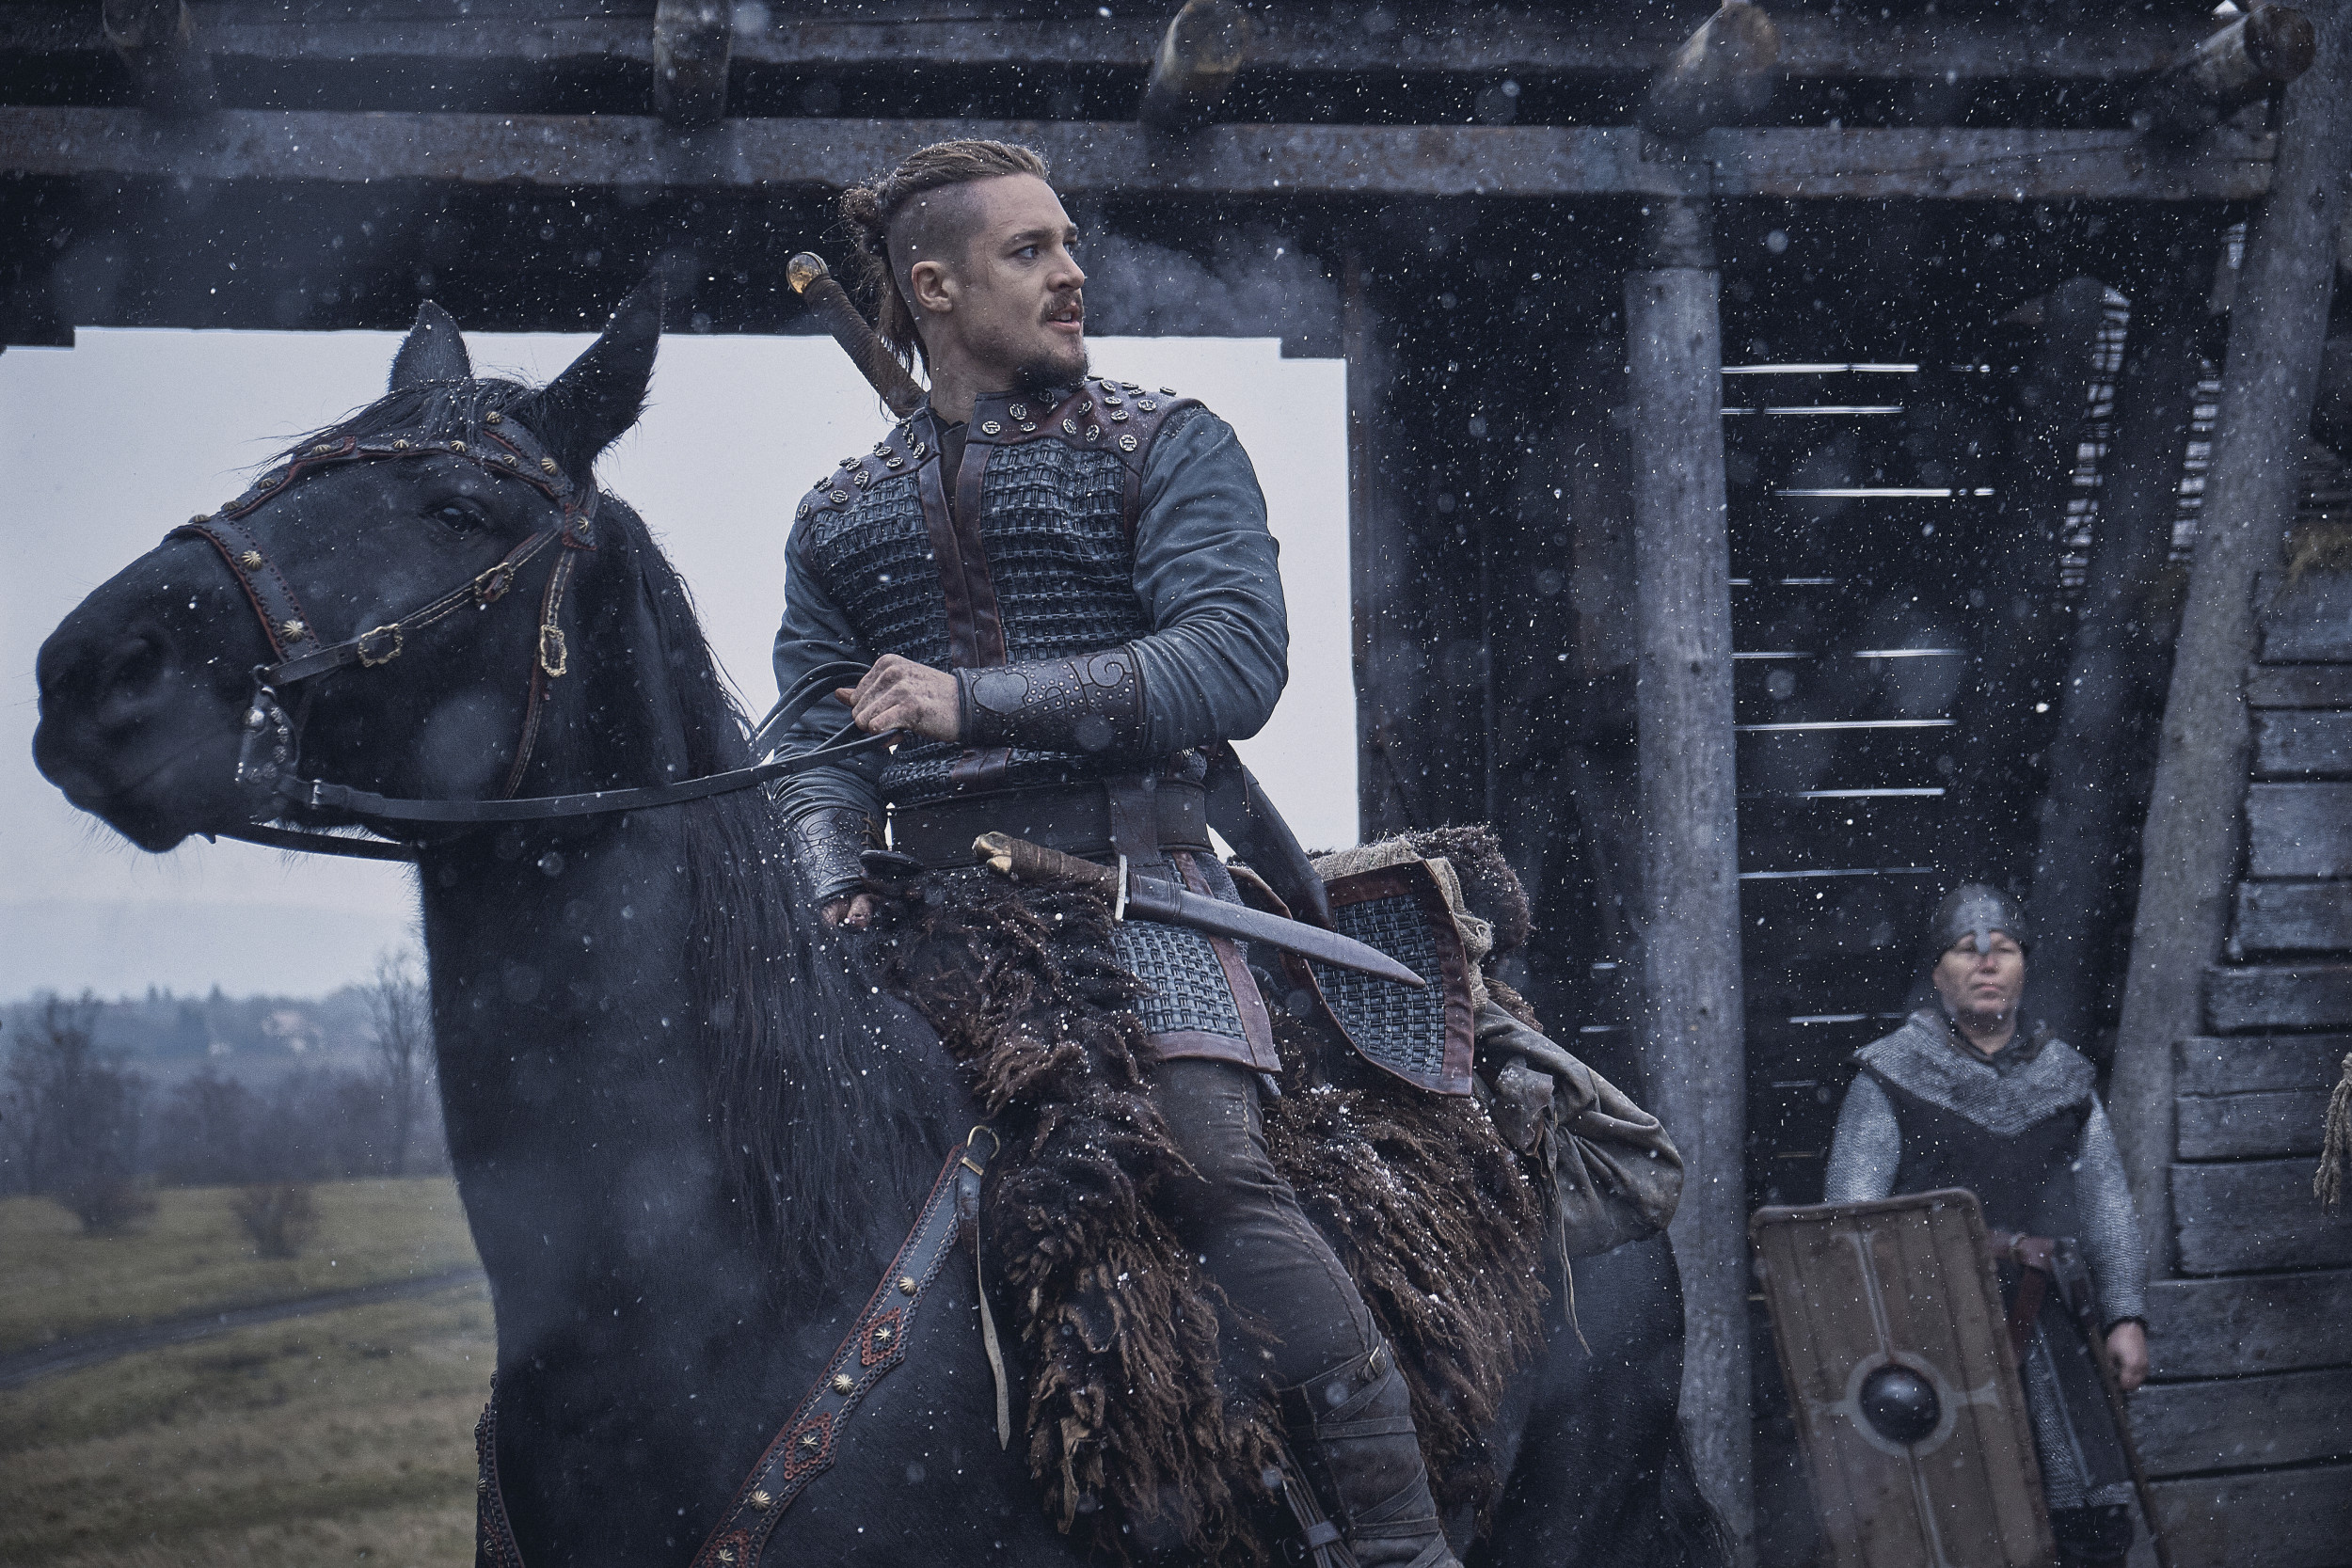 The Last Kingdom Film Announced, Begins Production Next Year